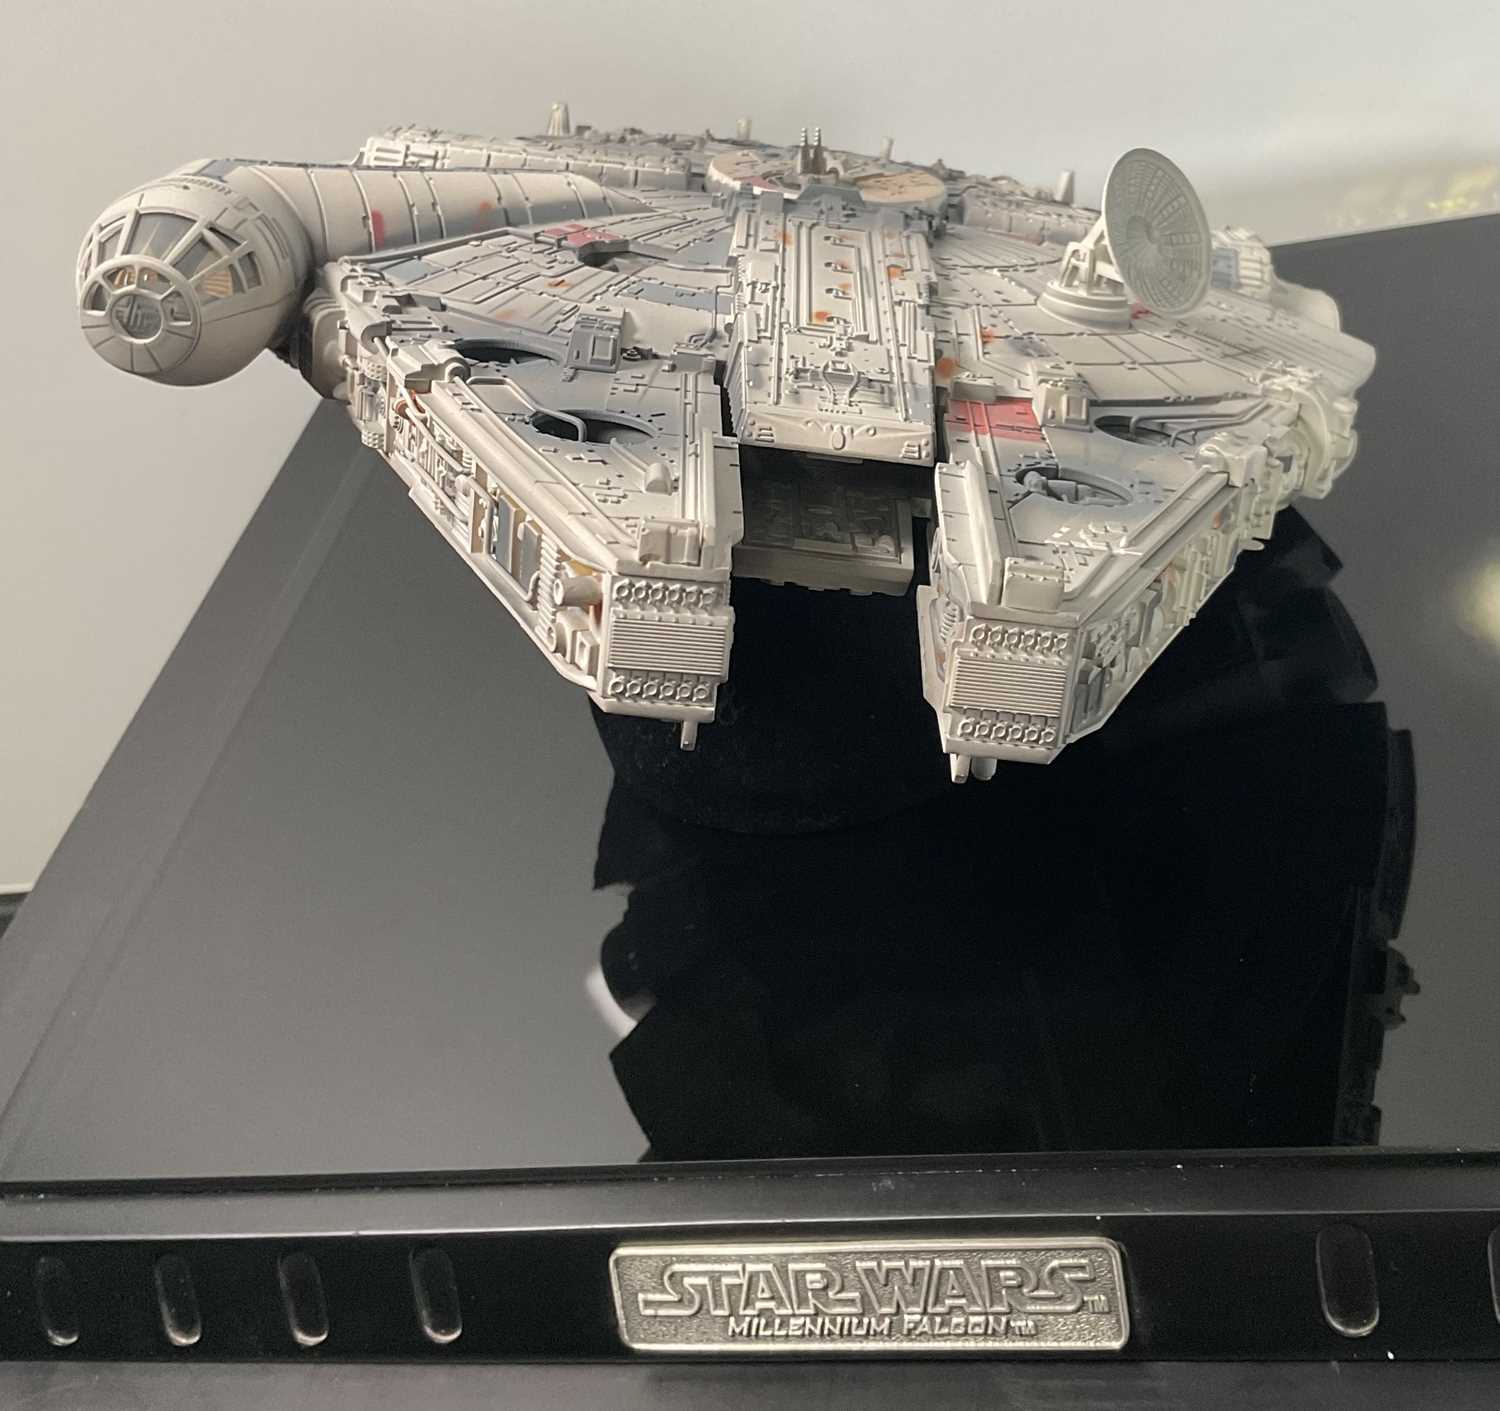 STAR WARS - A Code 3 Die Cast, hand-painted replica of the Millennium Falcon scale, limited - Image 6 of 12